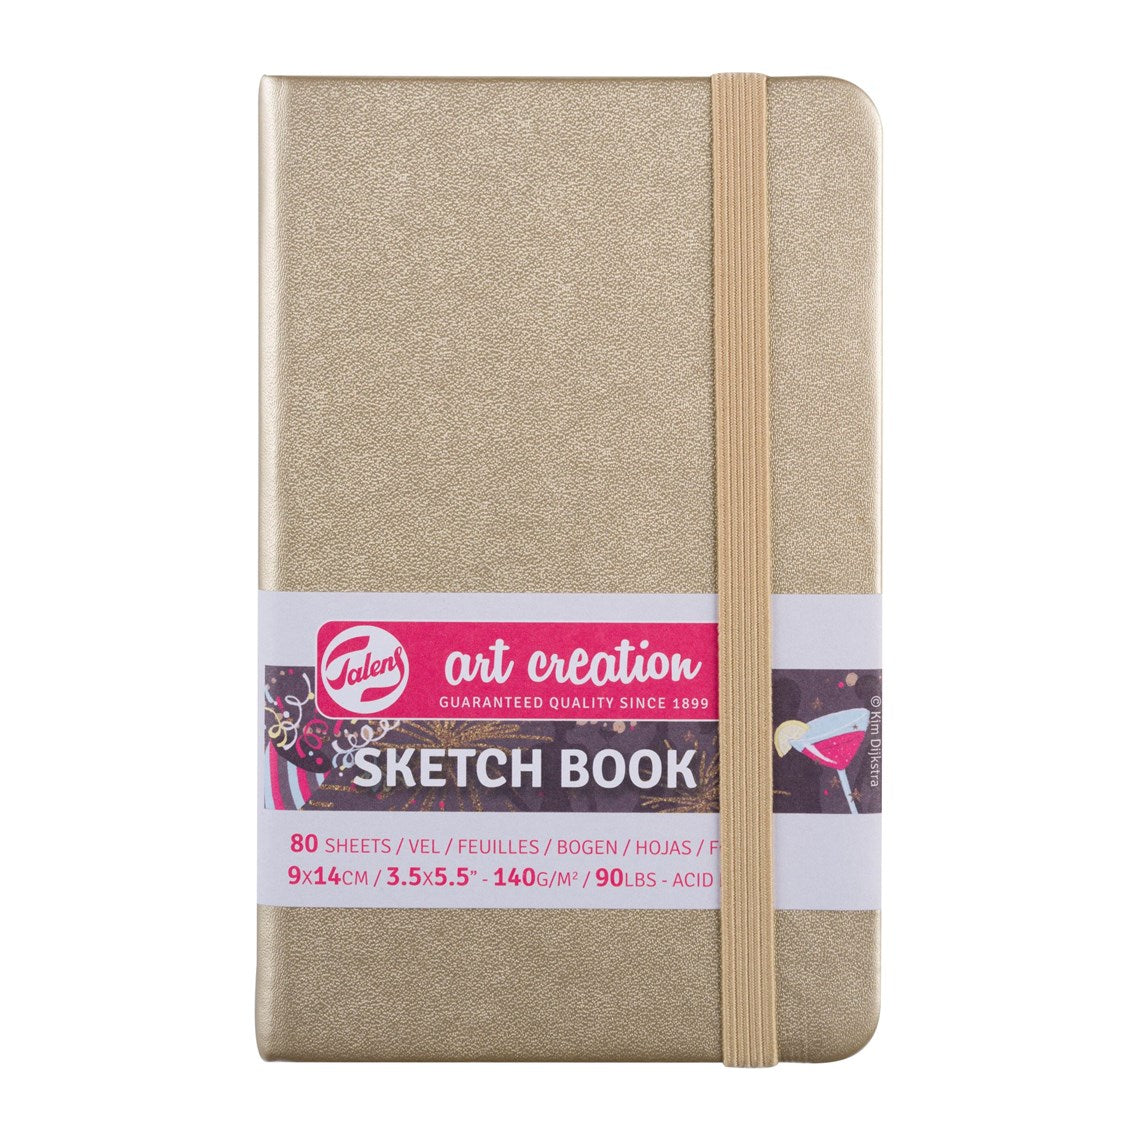 Royal Talens T9314-014M 441750 Talens Art Creation Sketchbook, Drawing  Notebook, 4.7 x 4.7 inches (12 x 12 cm), Pastel Pink